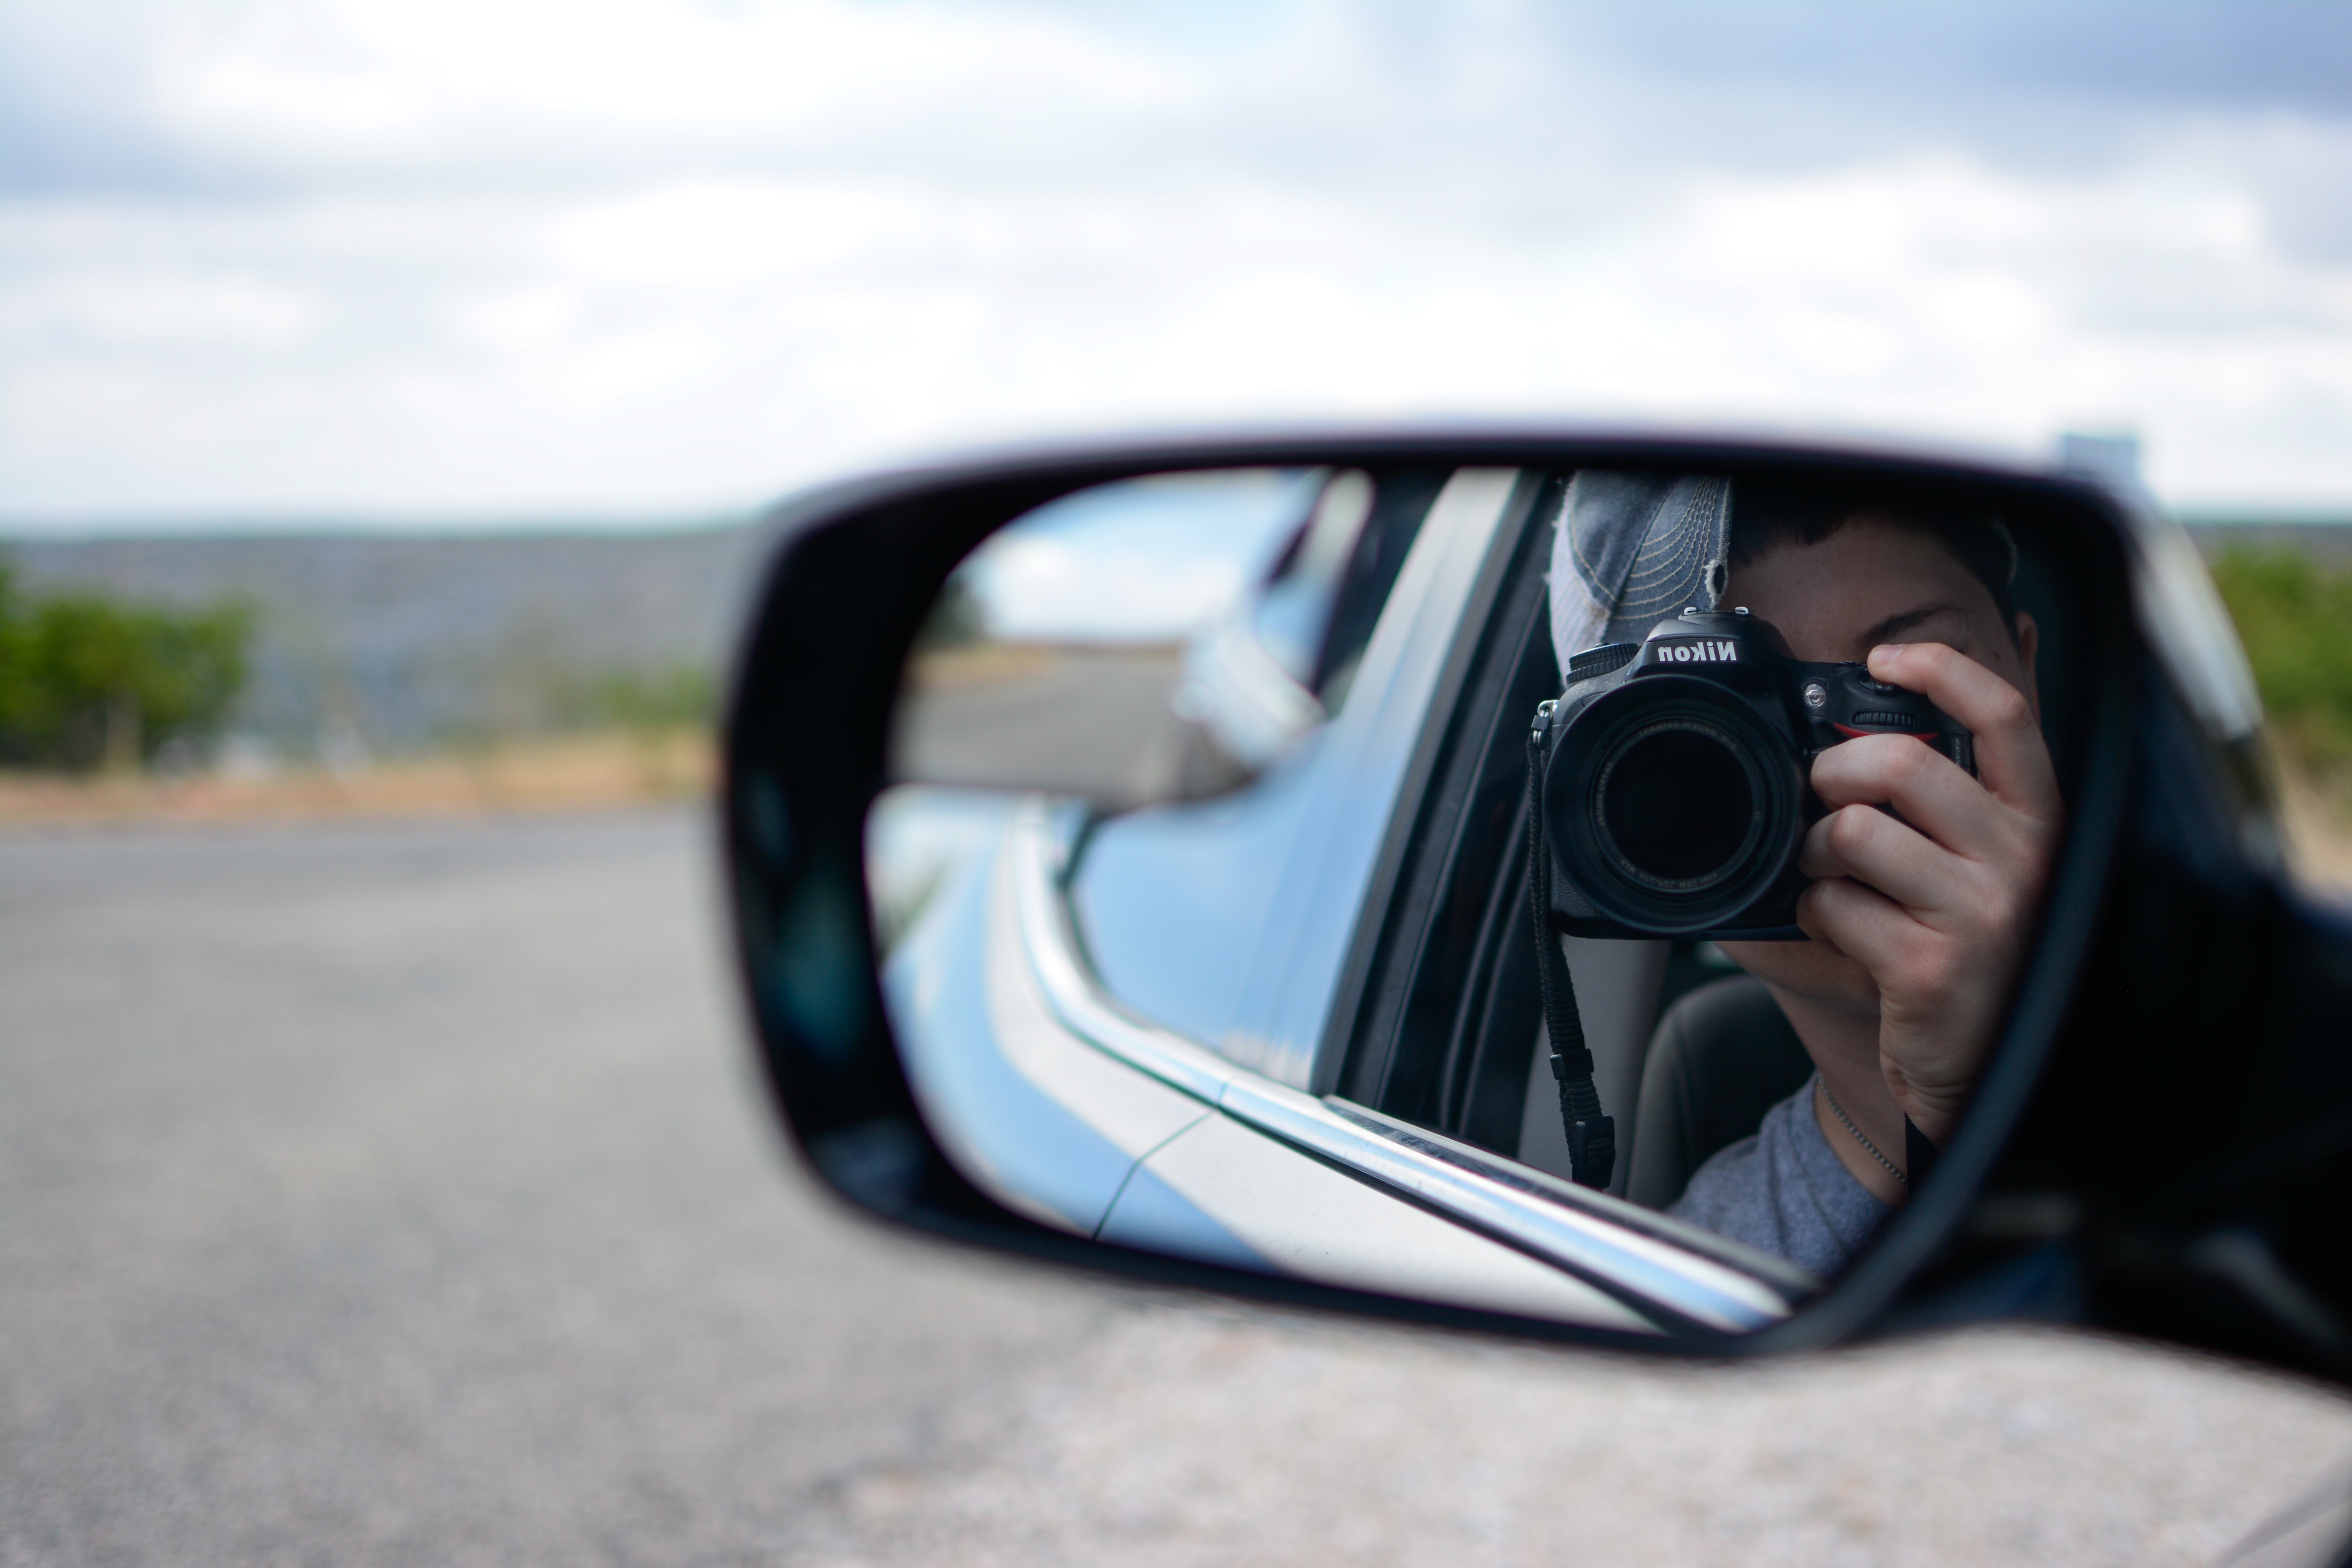 A person seated in a car is reflected in the side mirror of a car, taking a photo of themselves with a Nikon camera.